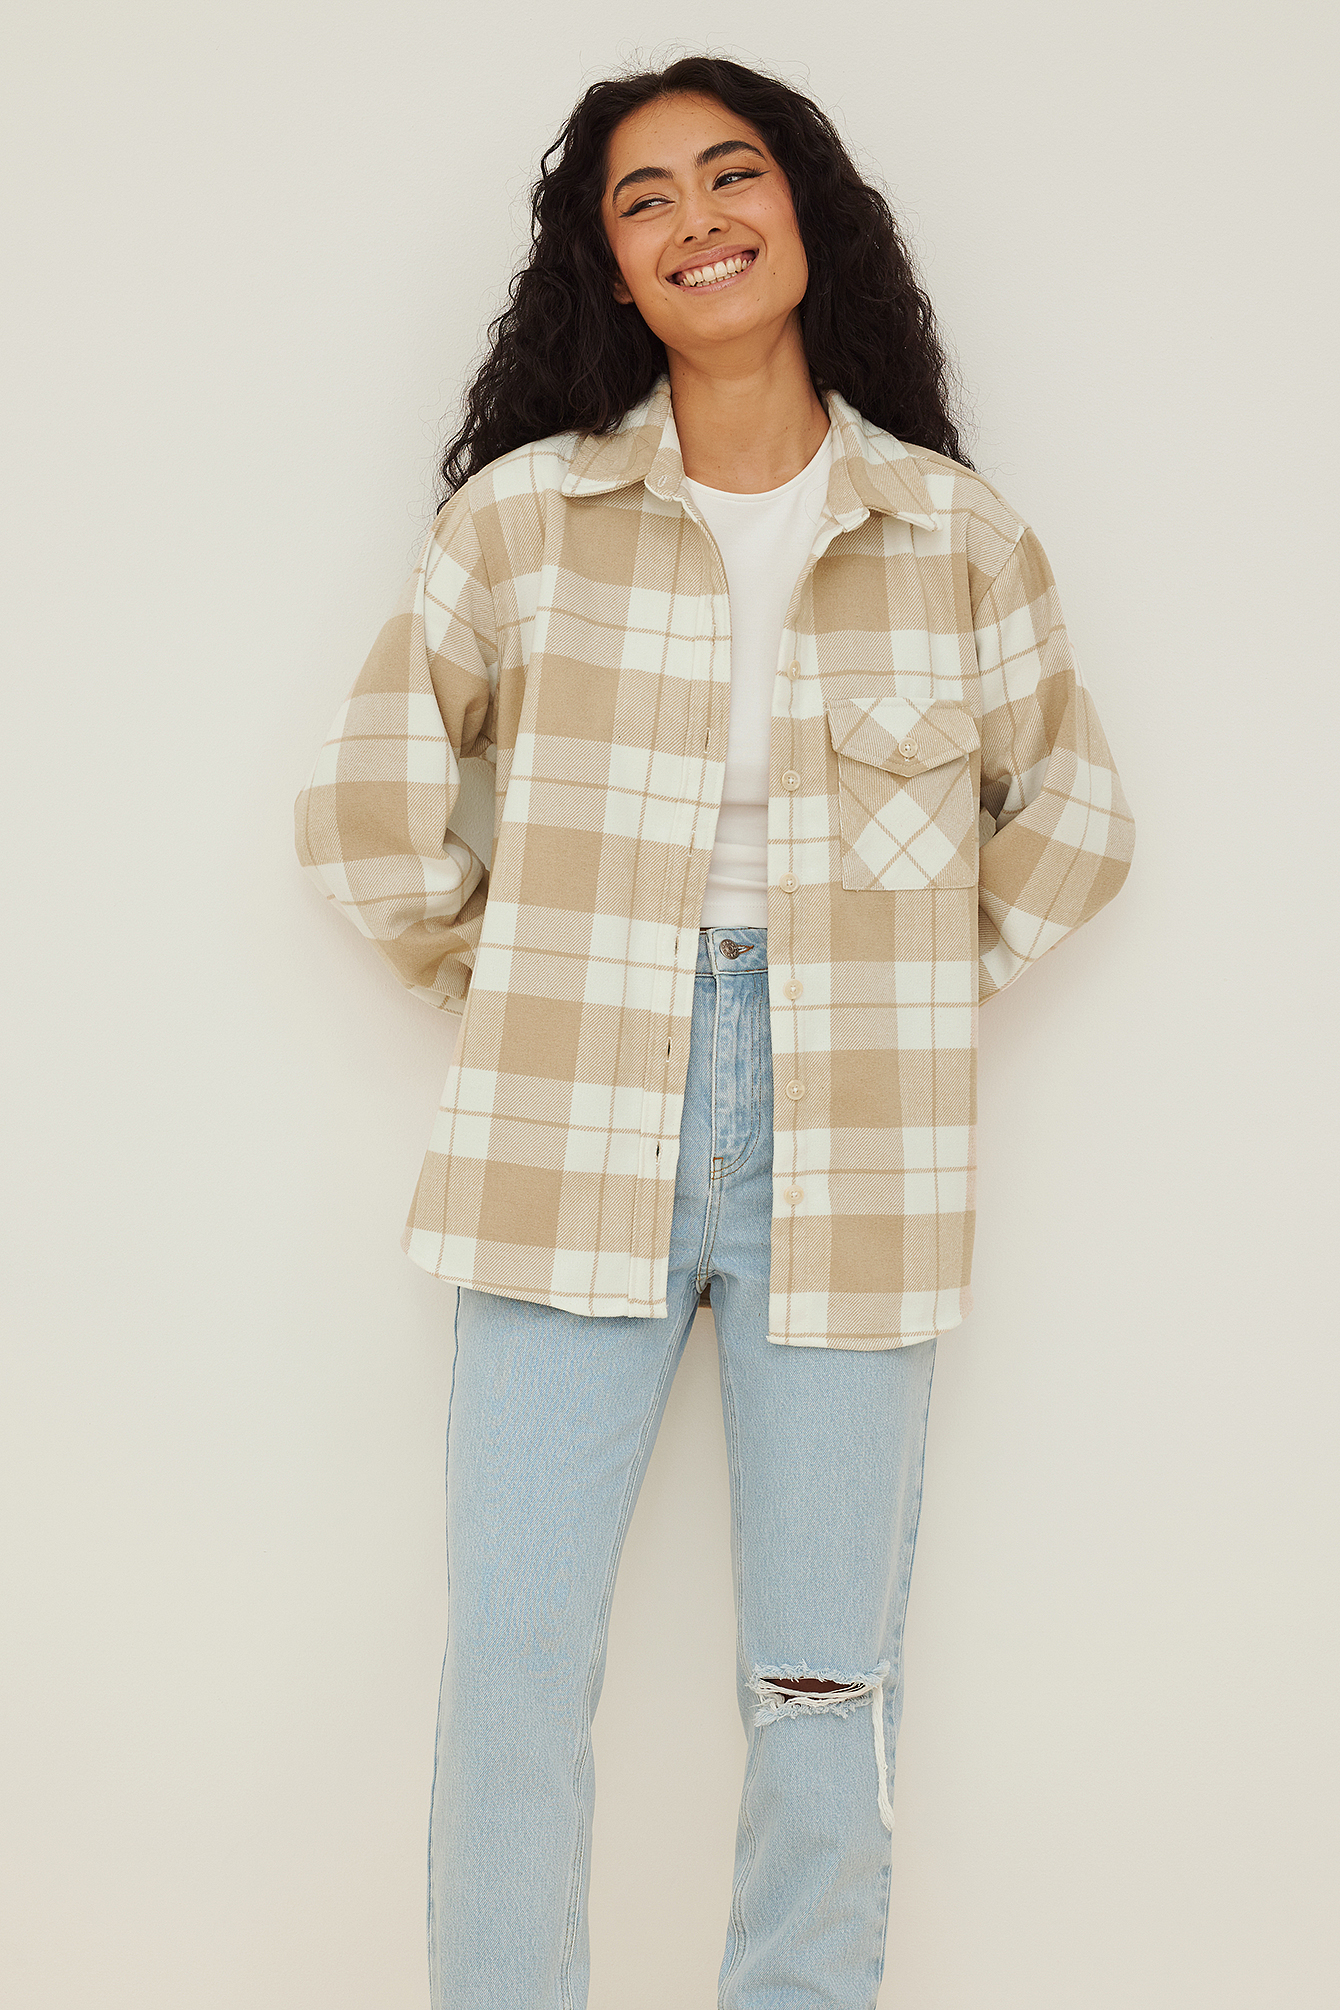 Oversized Checkered Overshirt Outfit.